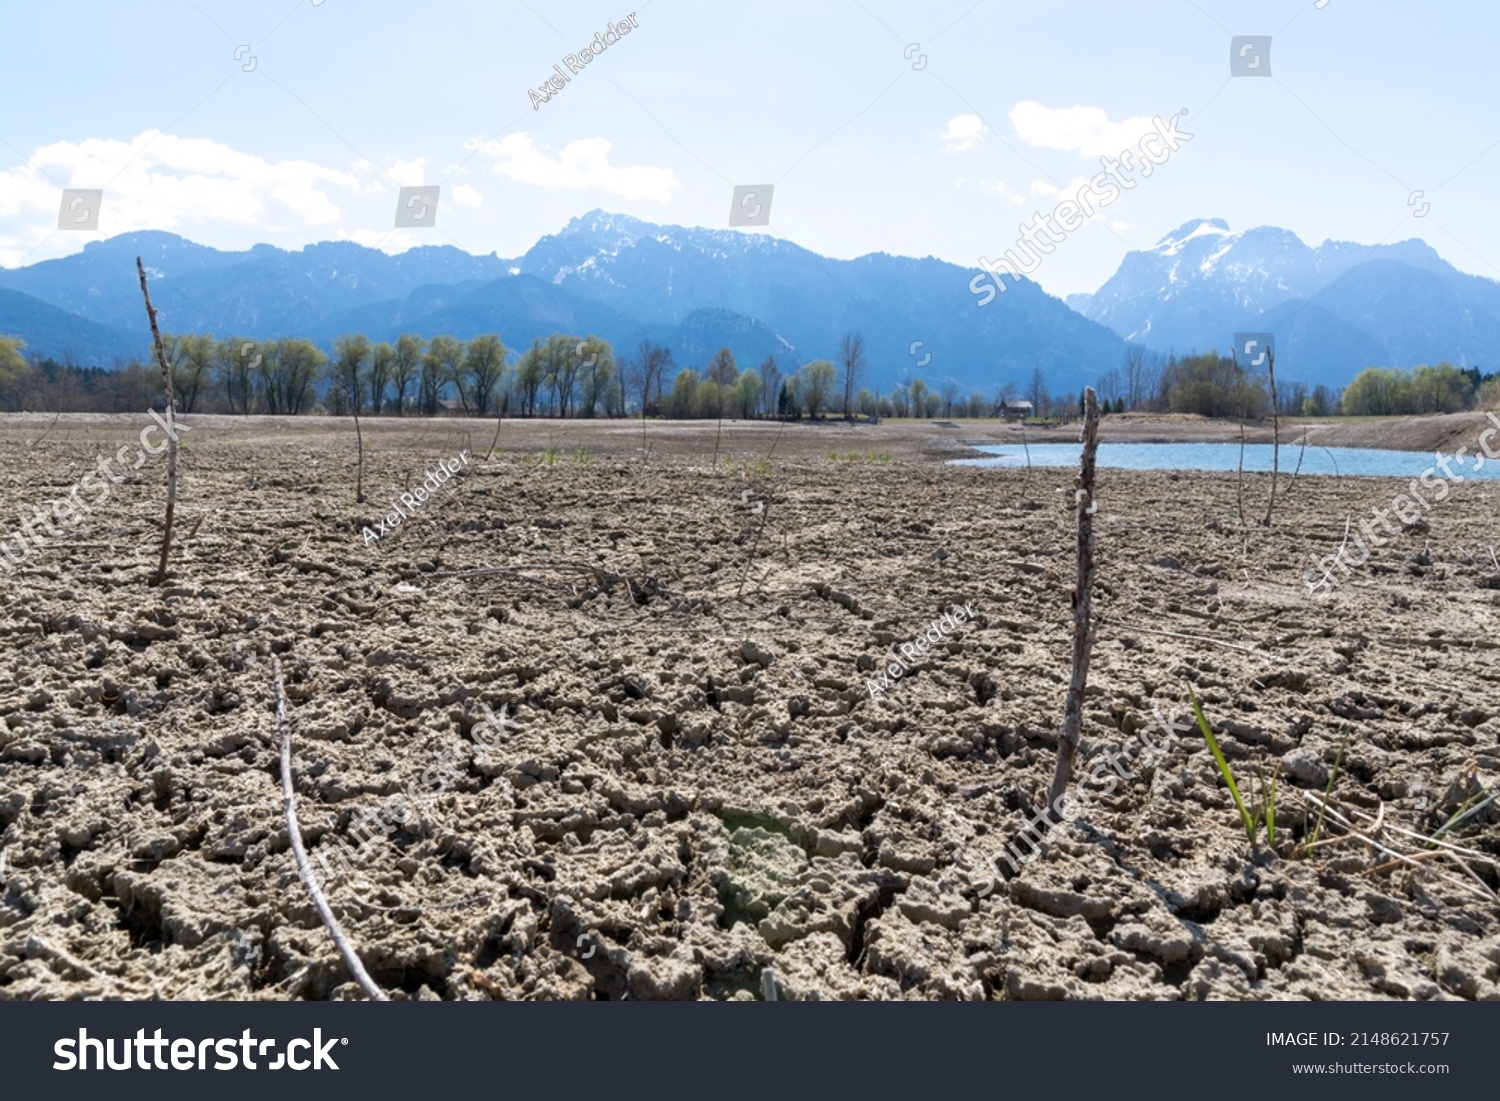 environmental protection, drought in germany and europe, a dried up lake in the alps, in the background mountains and houses #2148621757